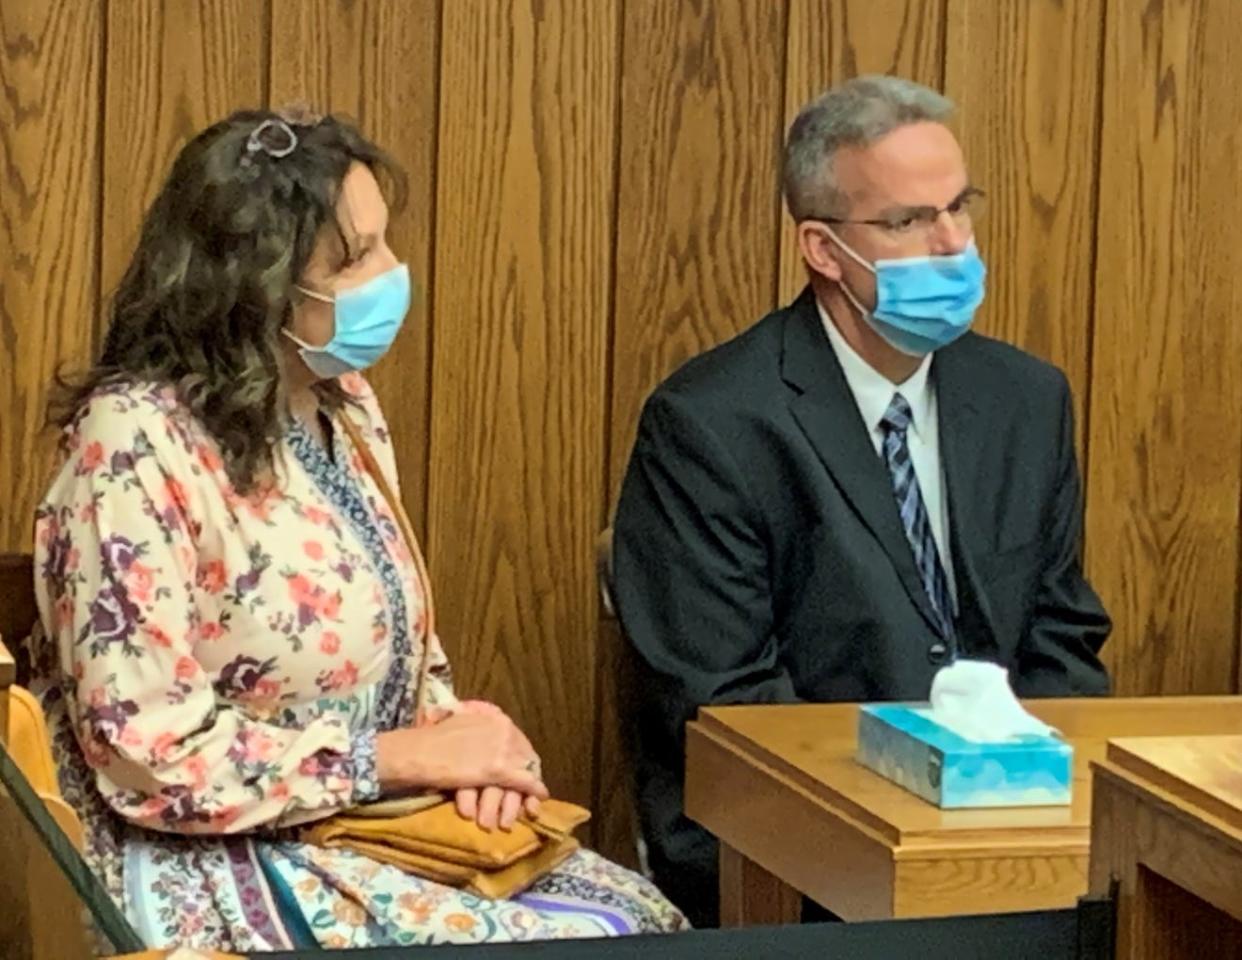 Former Marion County judge Jason D. Warner, right, and his wife Julia M. Warner are each serving two years in prison after being convicted of complicity to tampering with evidence, a fourth-degree felony, and complicity to leaving the scene of an accident, a third-degree felony, by visiting Judge Patricia Cosgrove during a hearing held March 10, 2021. The Warners unsuccessfully appealed to have their convictions overturned in November 2021 and the Ohio Supreme Court declined to hear a subsequent appeal in March 2022.